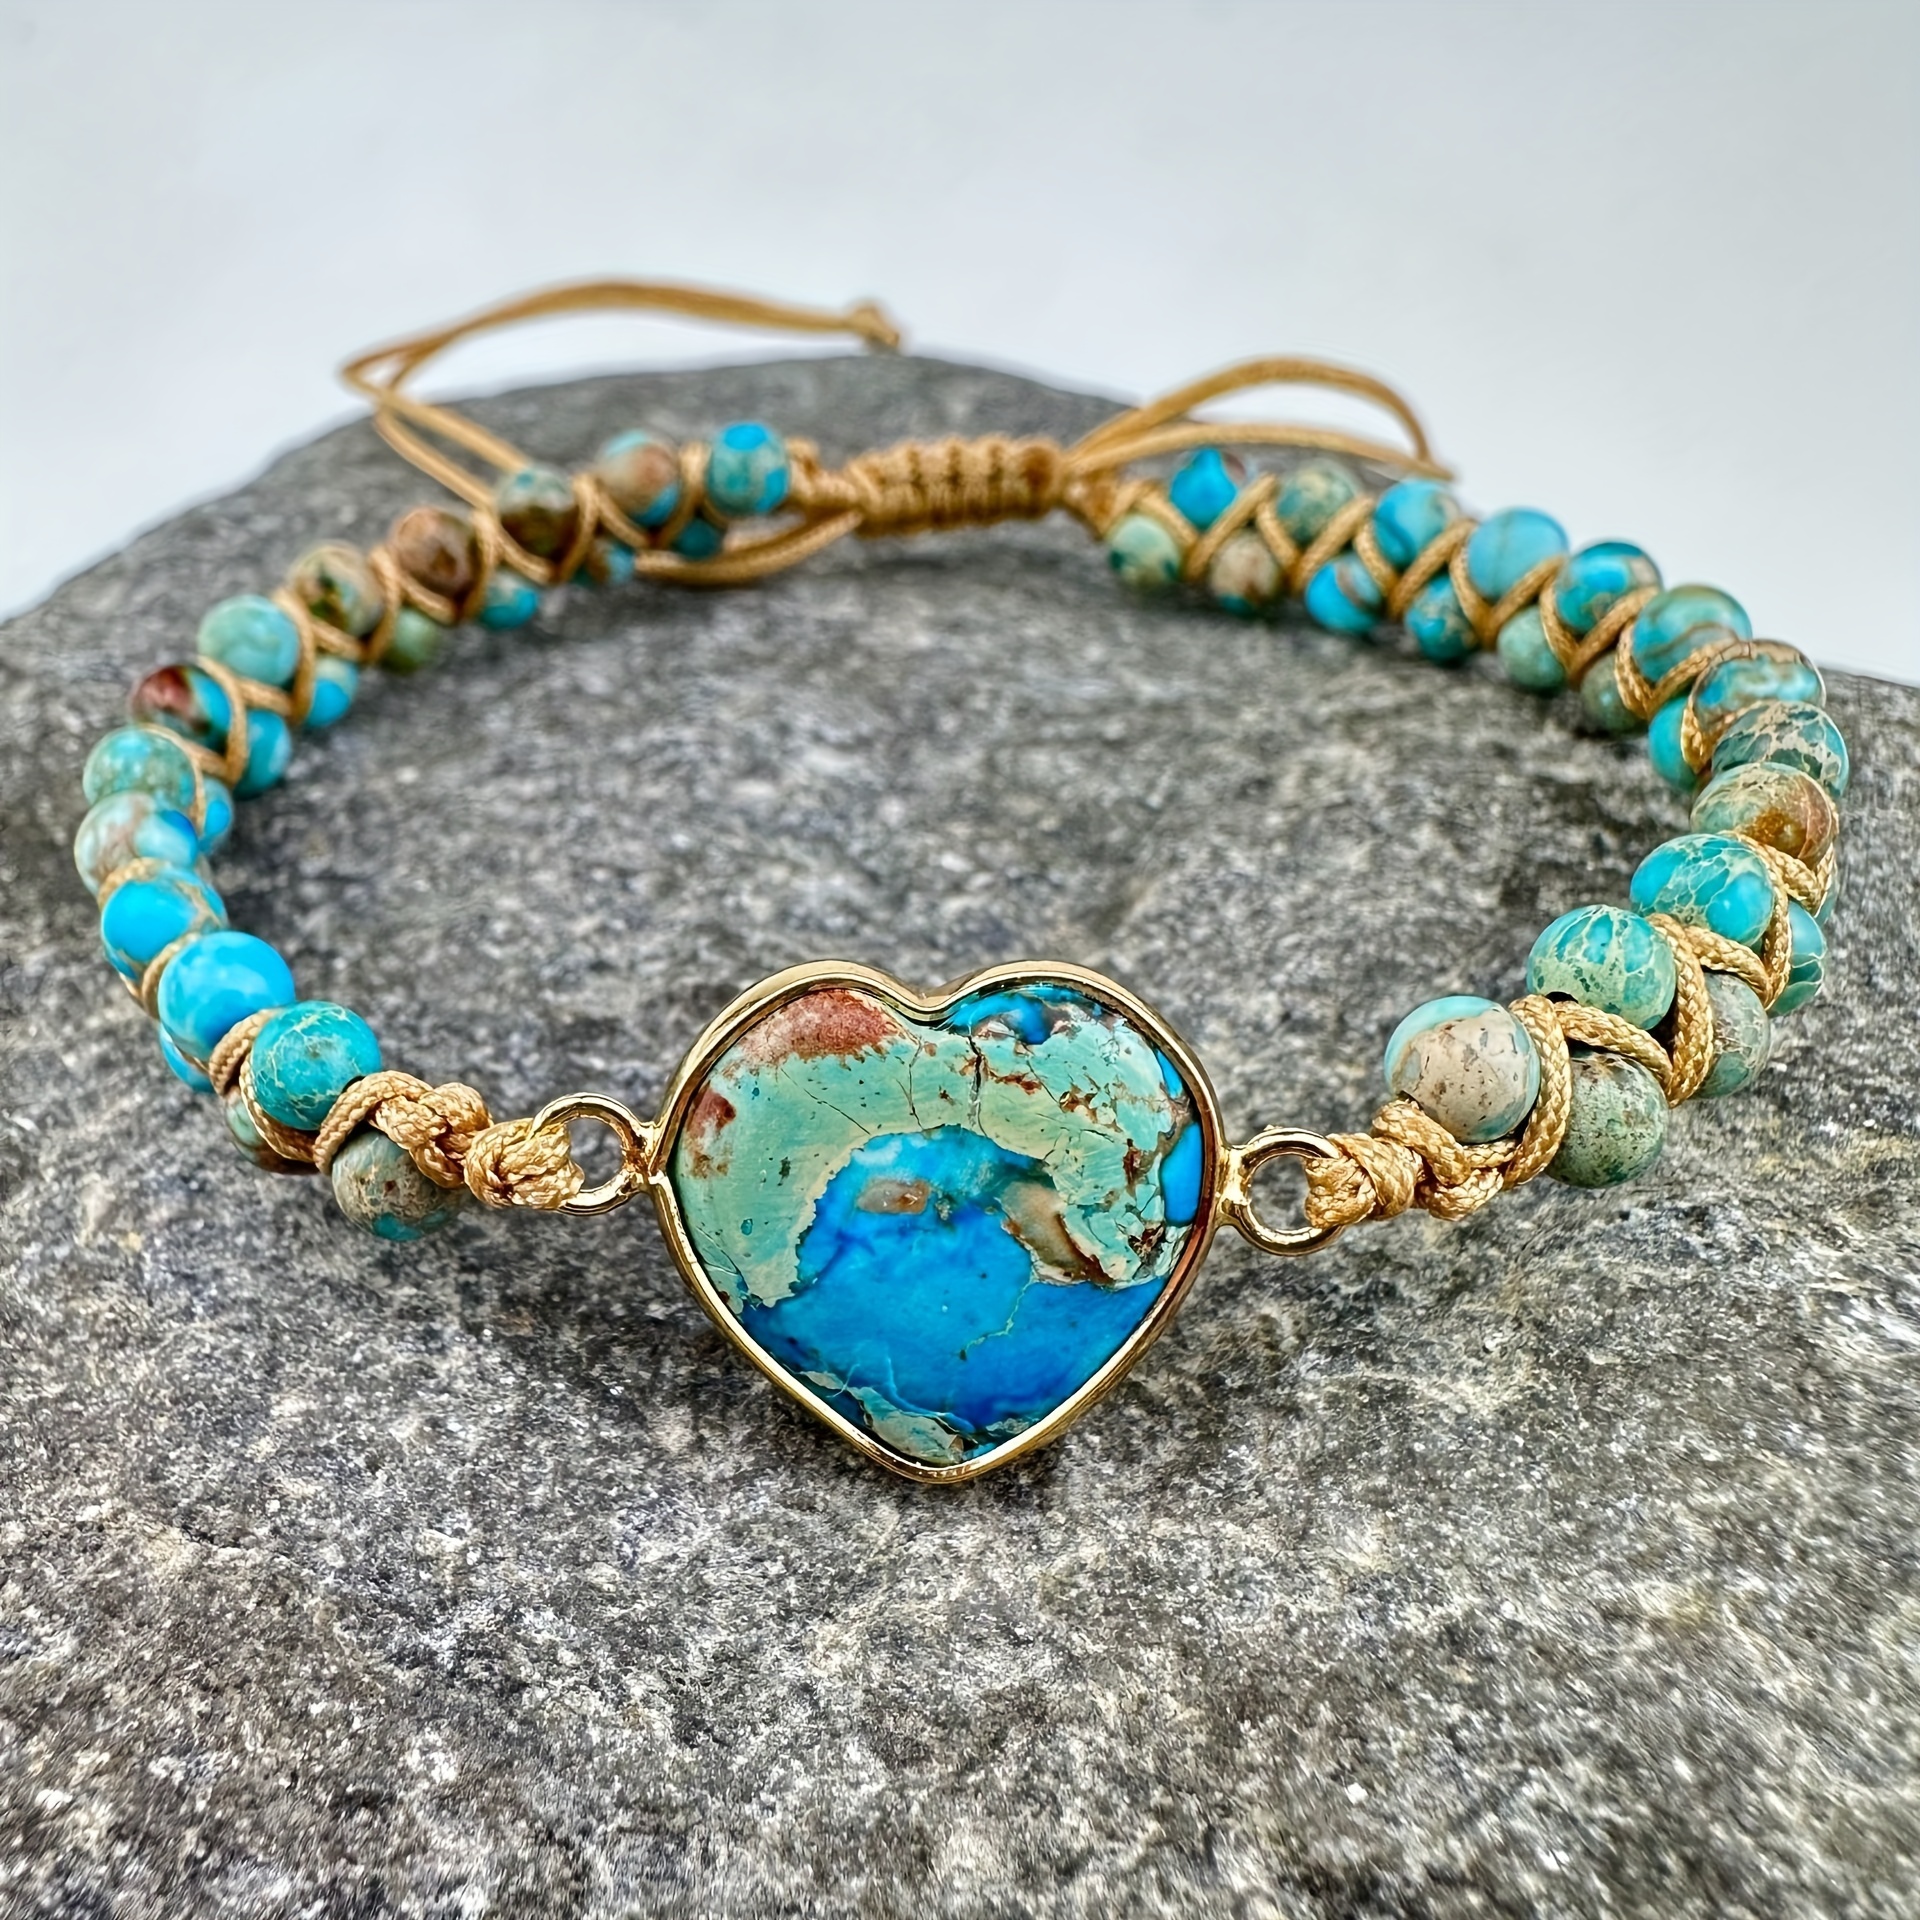 Blue Double Layer Stone Beaded Bracelet in Gold